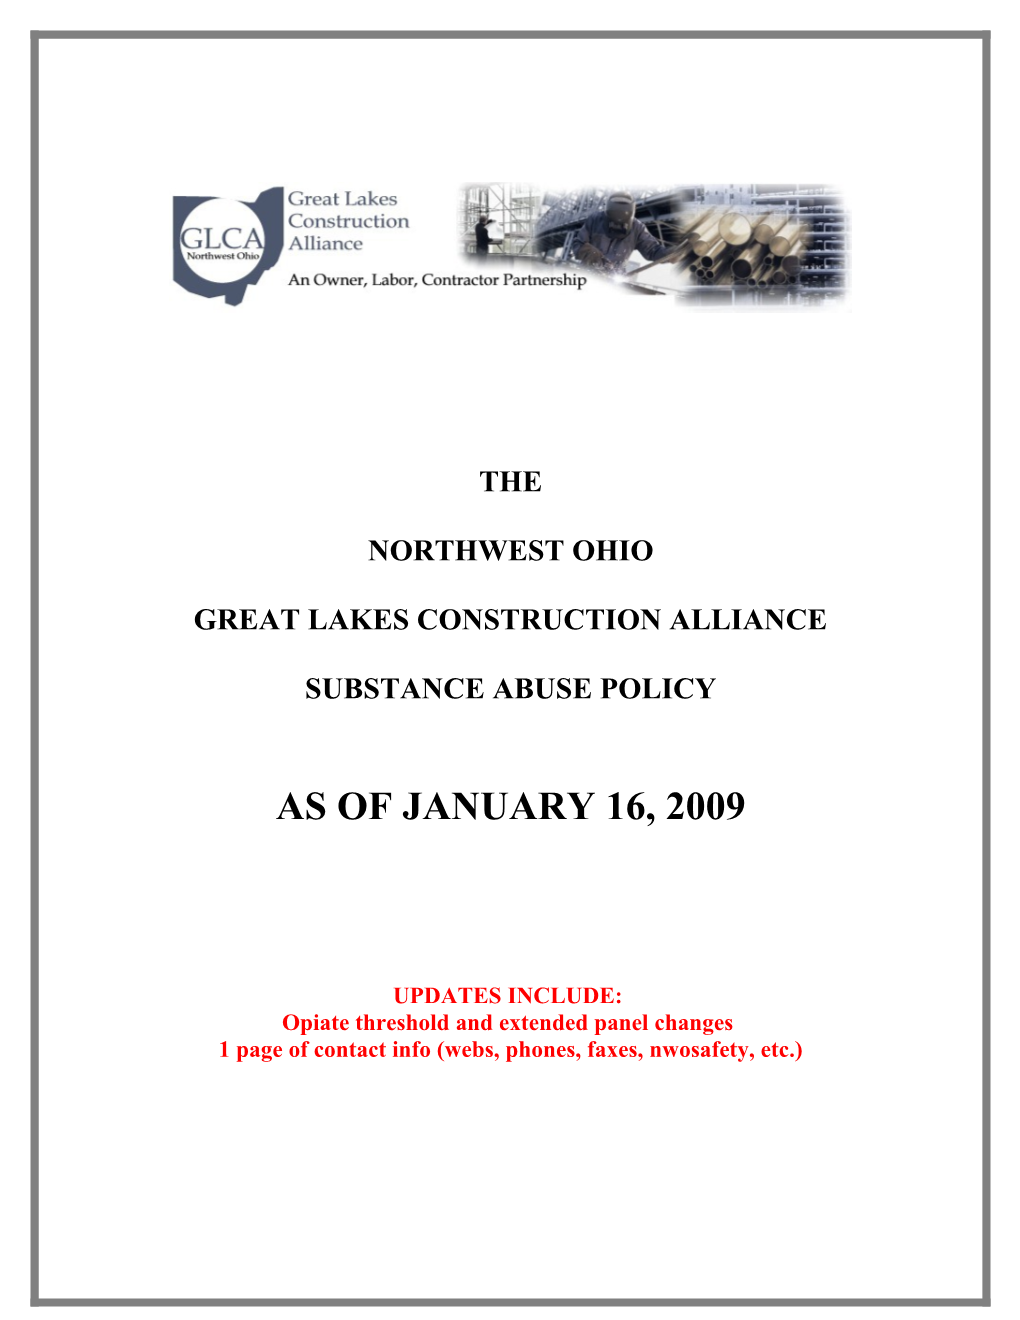 Great Lakes Construction Alliance